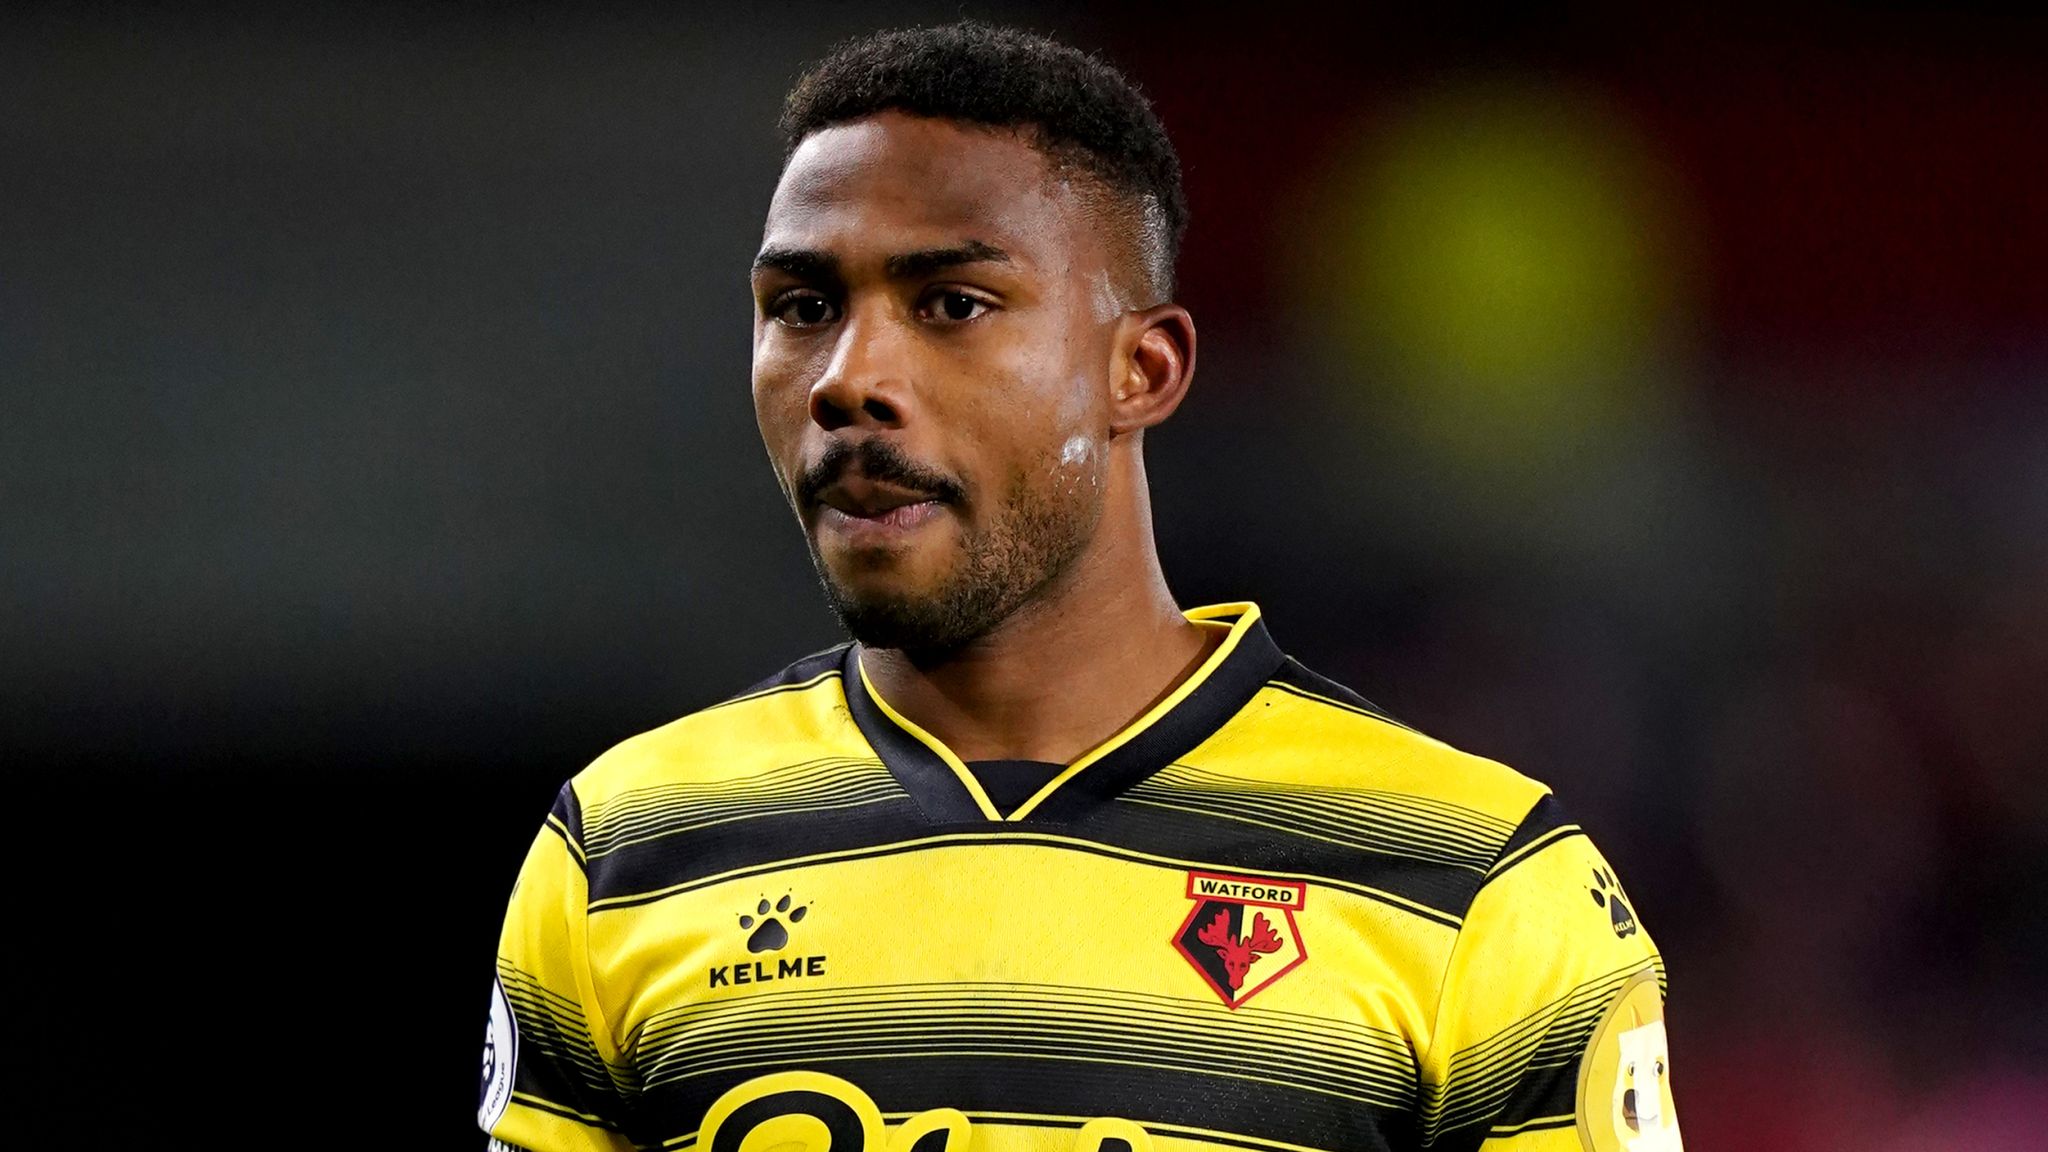 Emmanuel Dennis fires blank for Watford against Southampton as Joe Aribo's comes out top in 'battle of Nigerians'